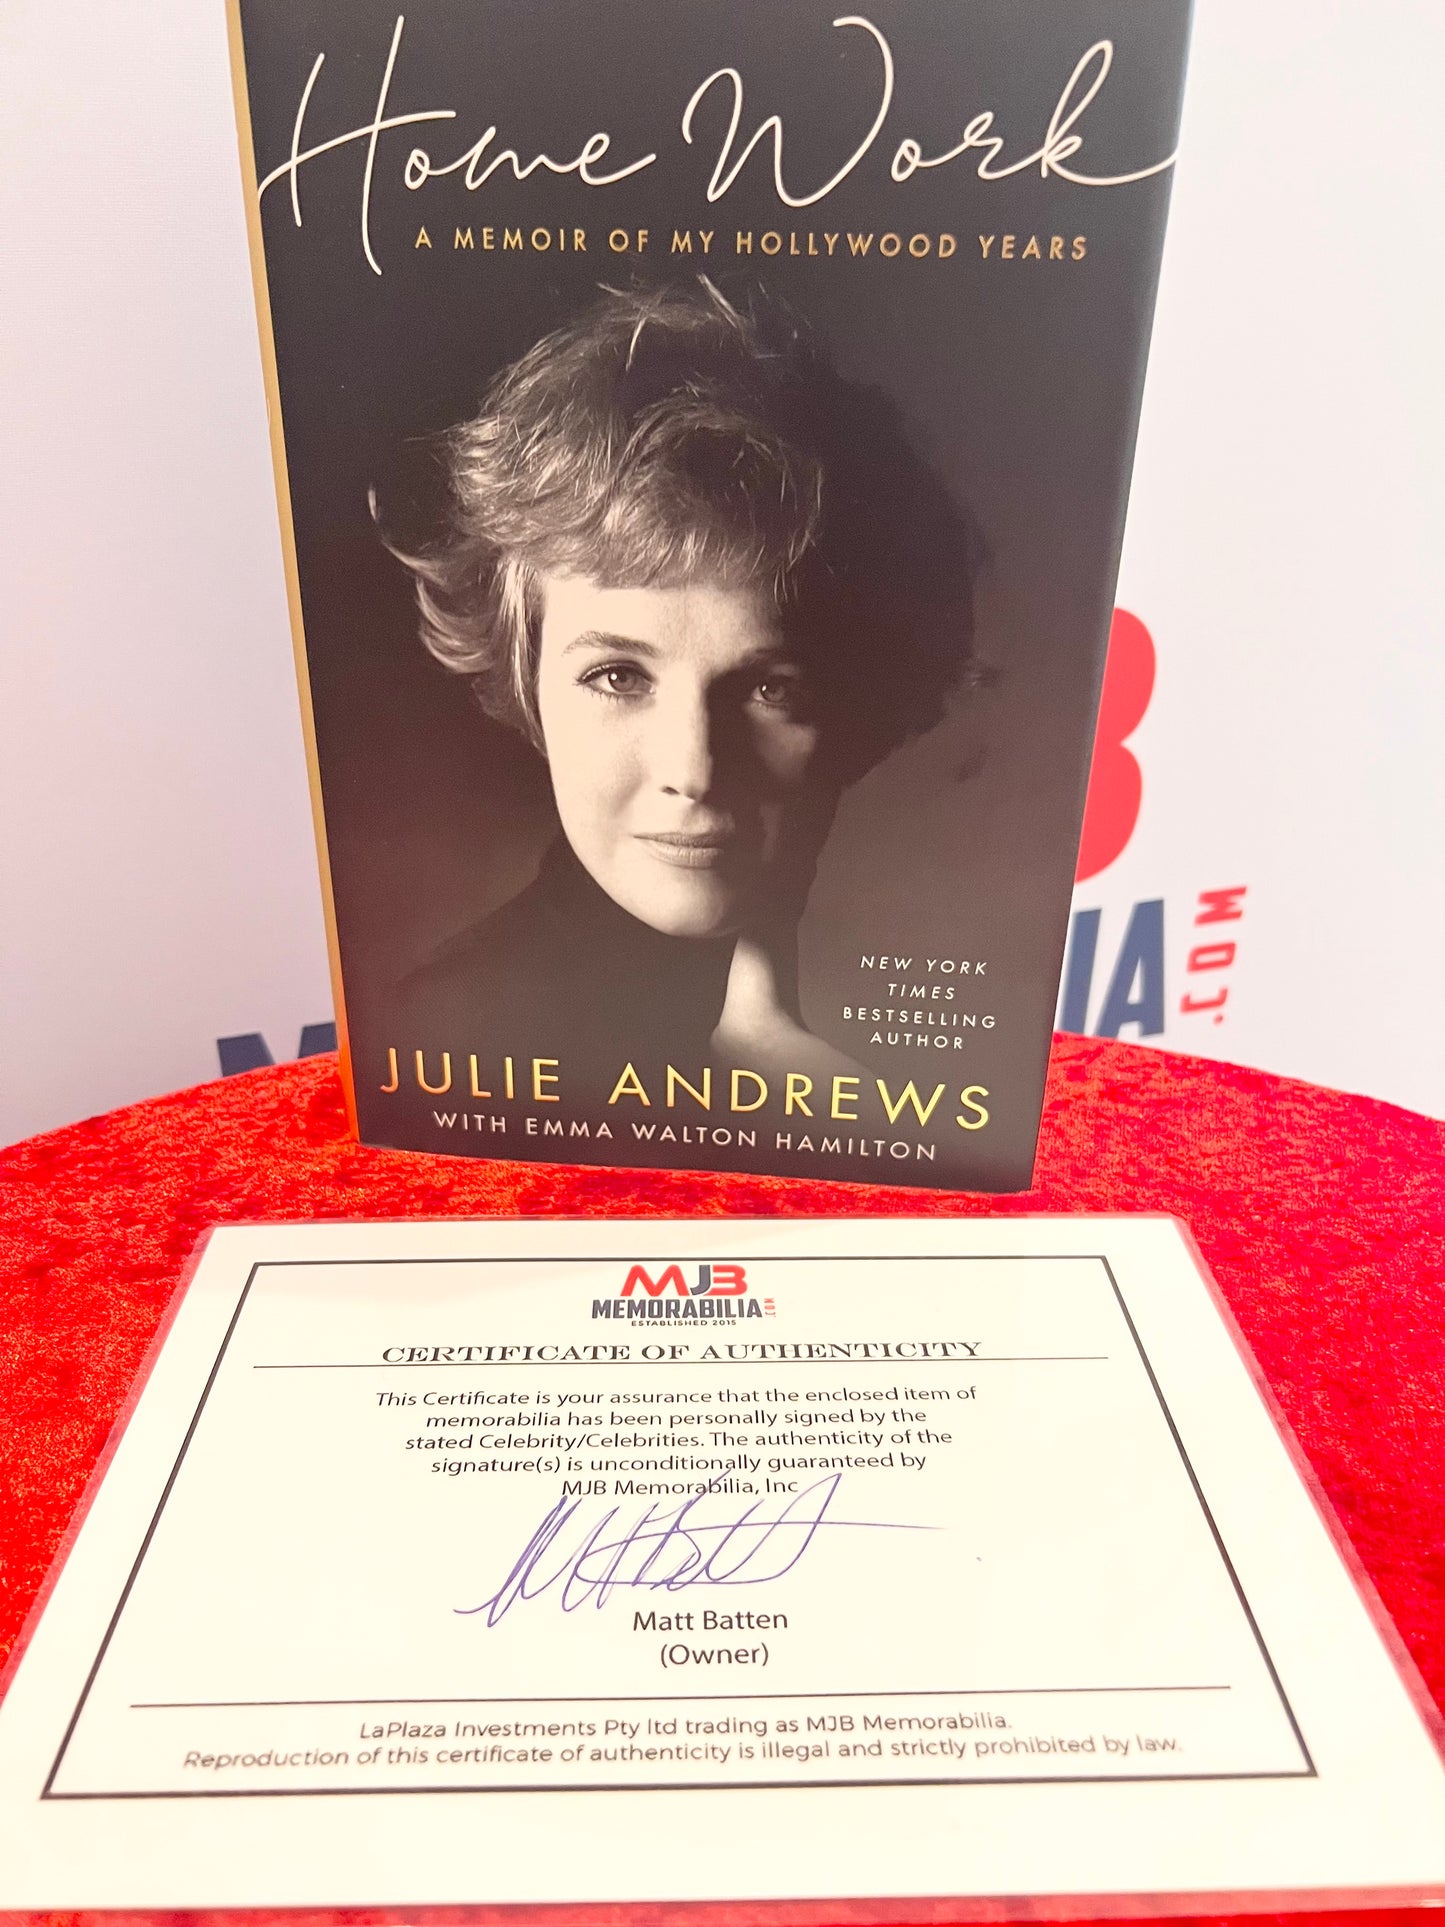 Julie Andrews Signed Autograph and Emma Walton Home Work Book The Sound of Music and Mary Poppins